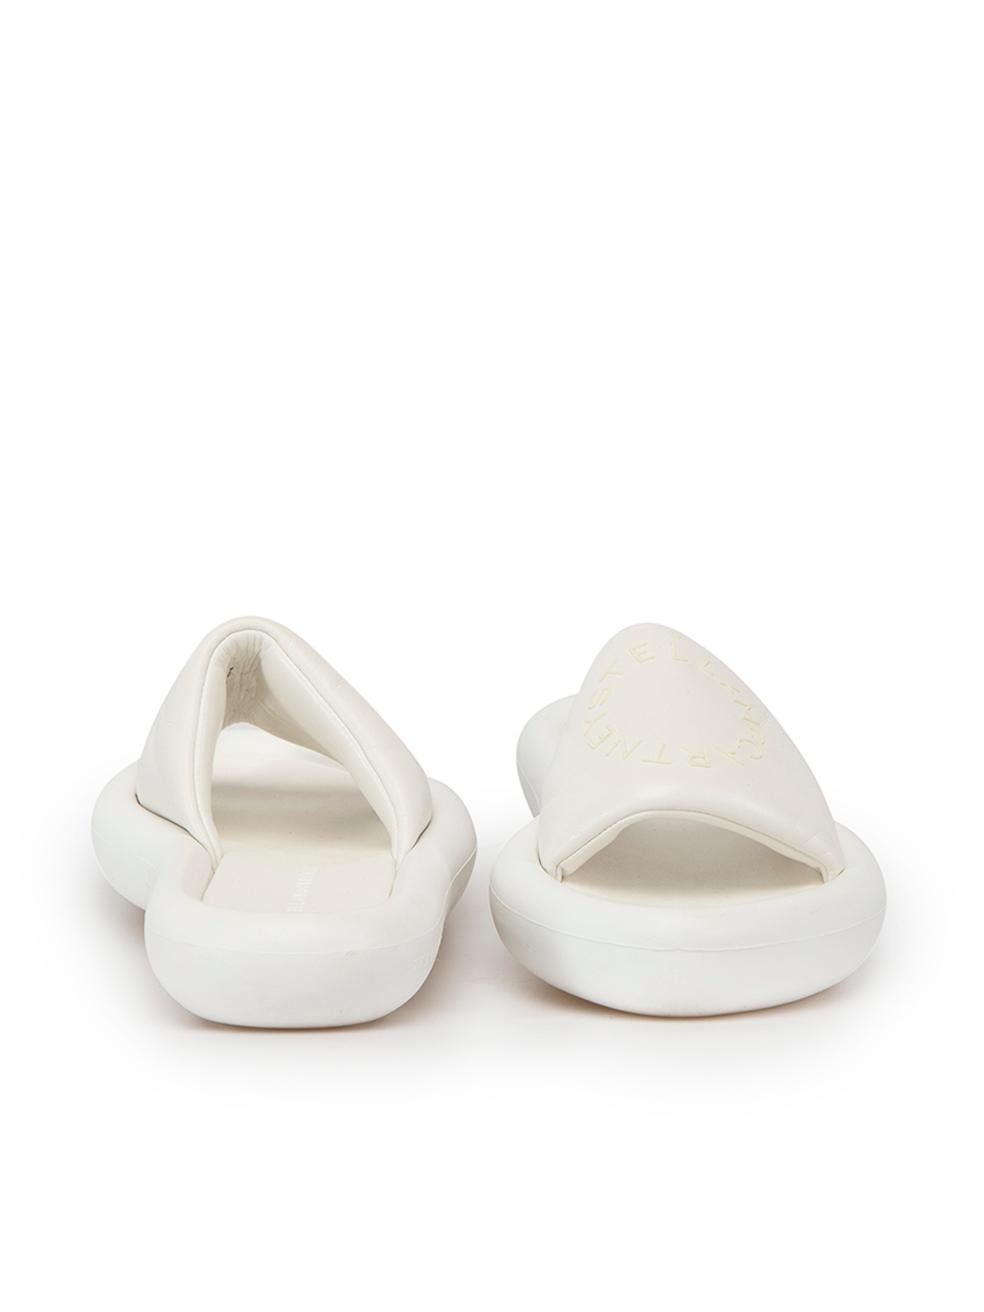 Stella McCartney White Vegan Leather Padded Logo Slides Size IT 37 In Good Condition For Sale In London, GB